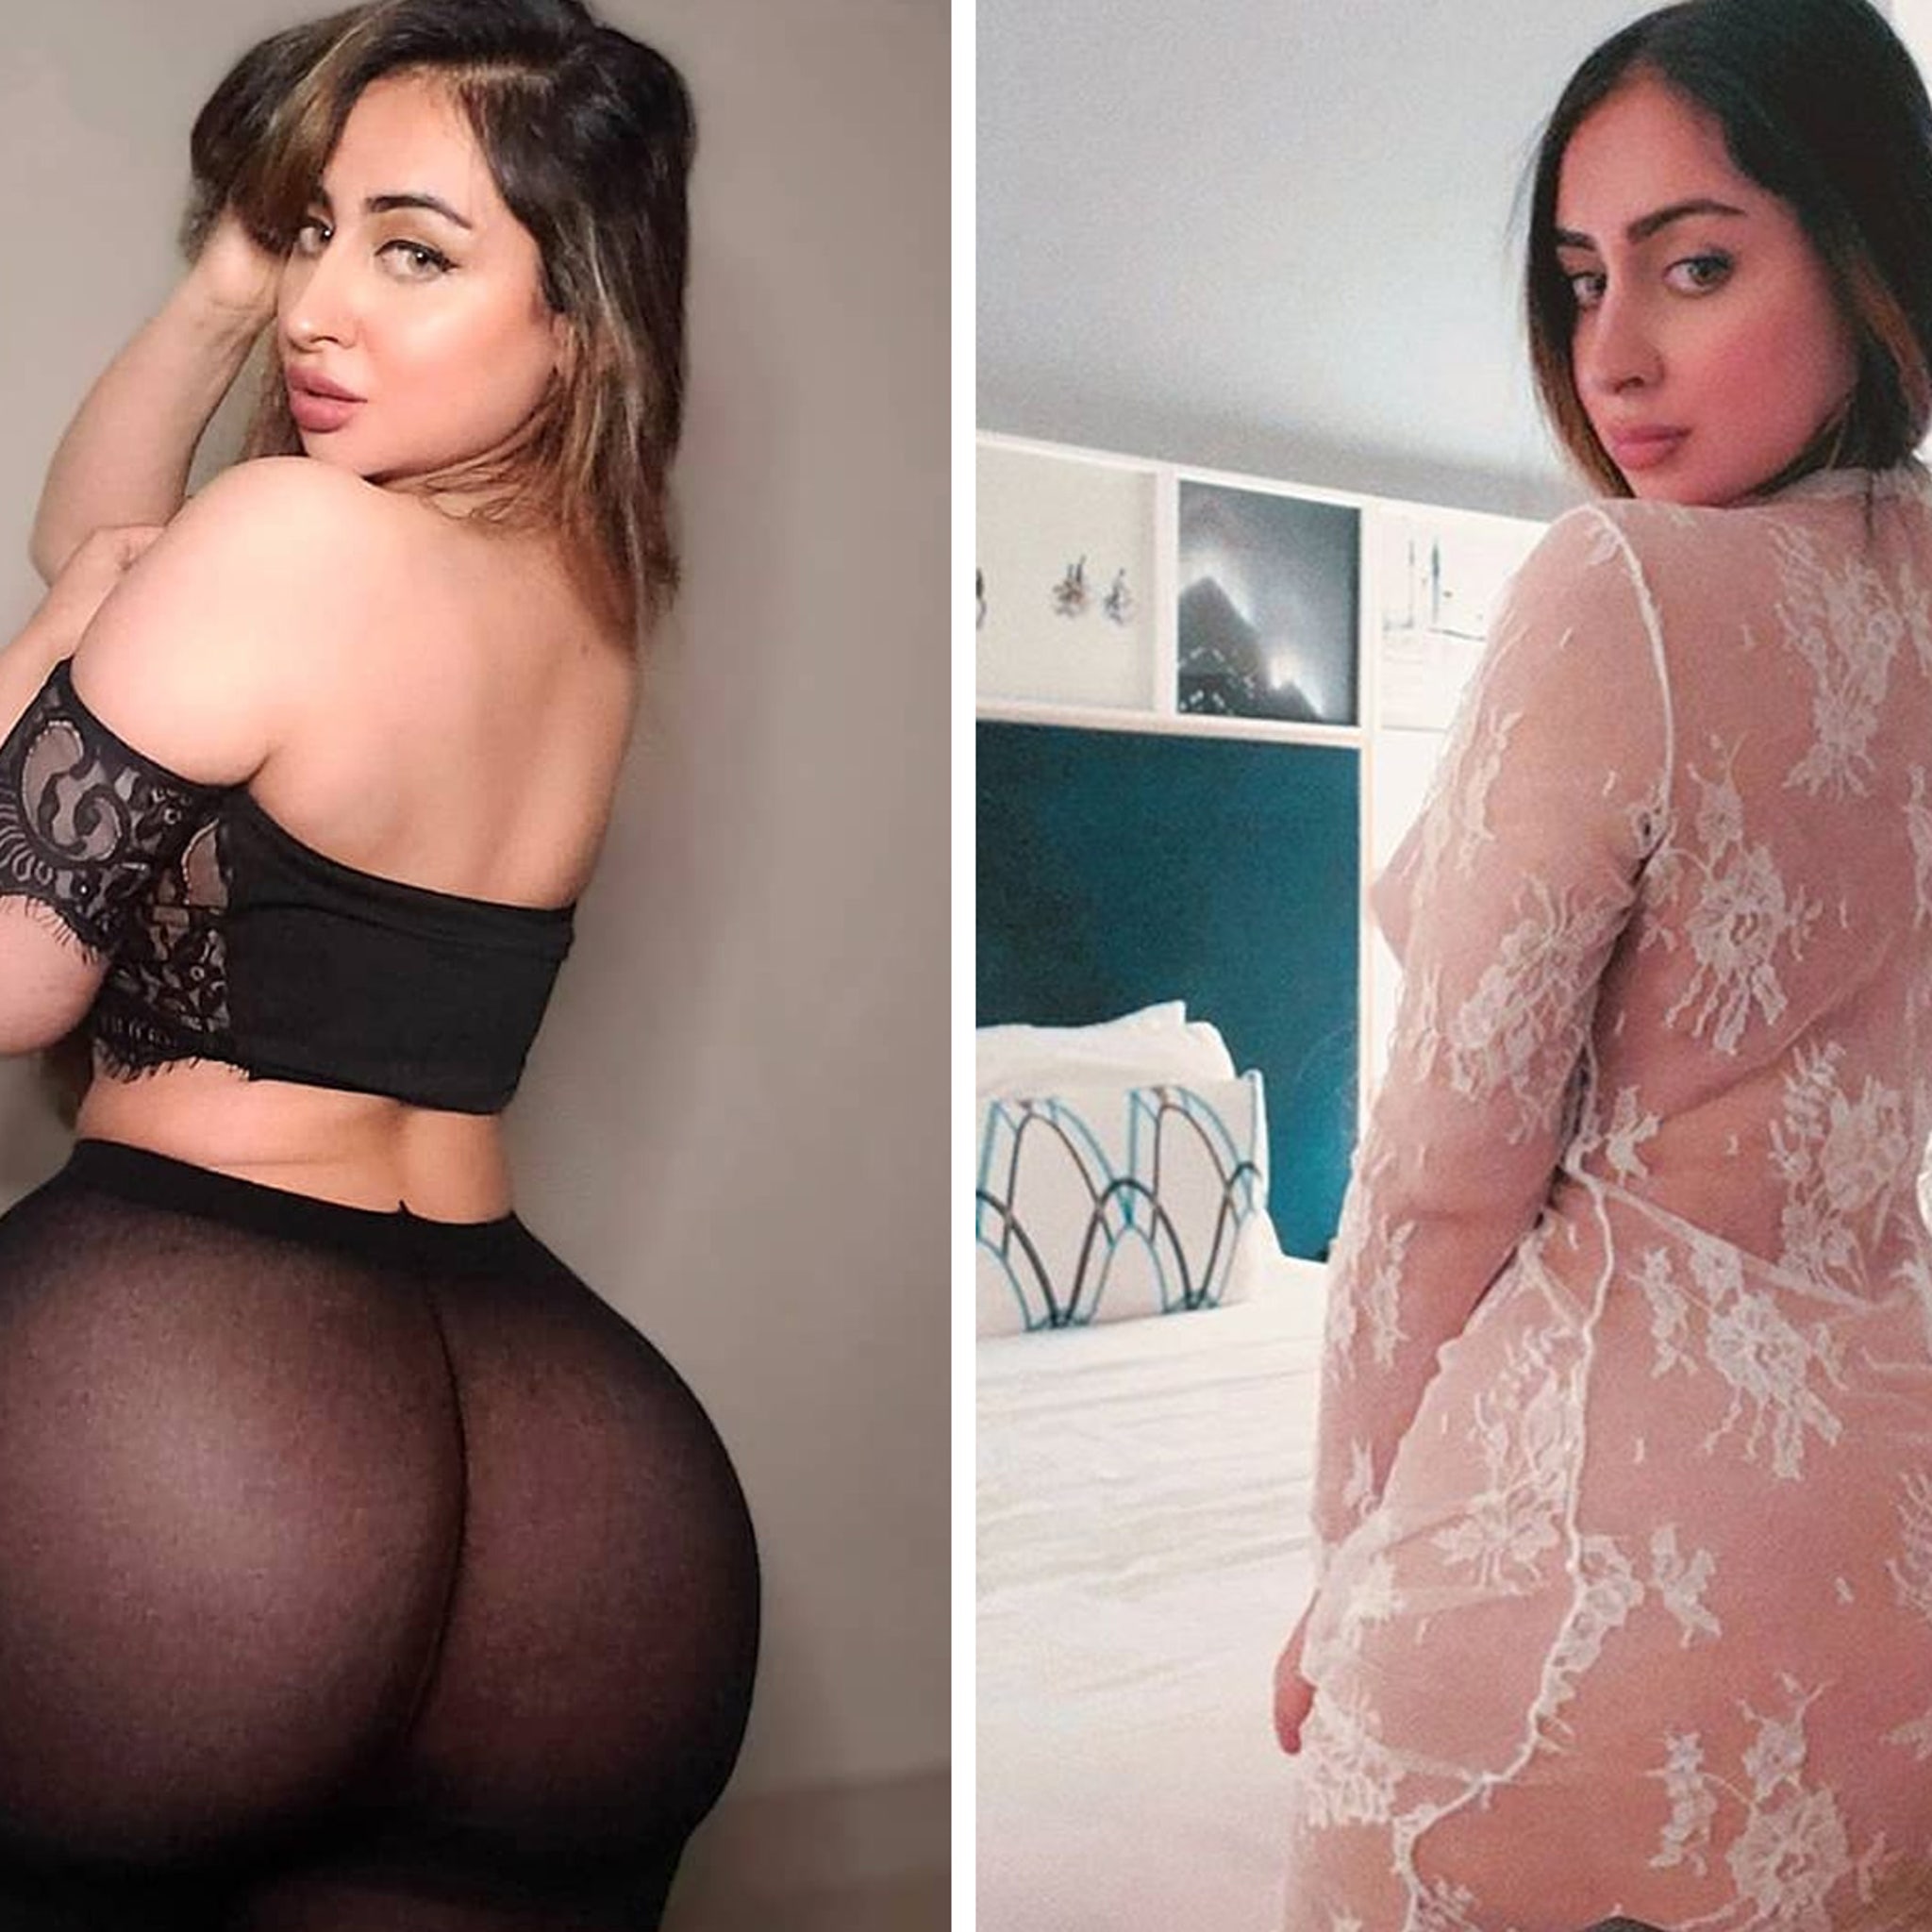 Instagram Model Says Botched Butt Lift Made Her Unable to Sit For 6 Months